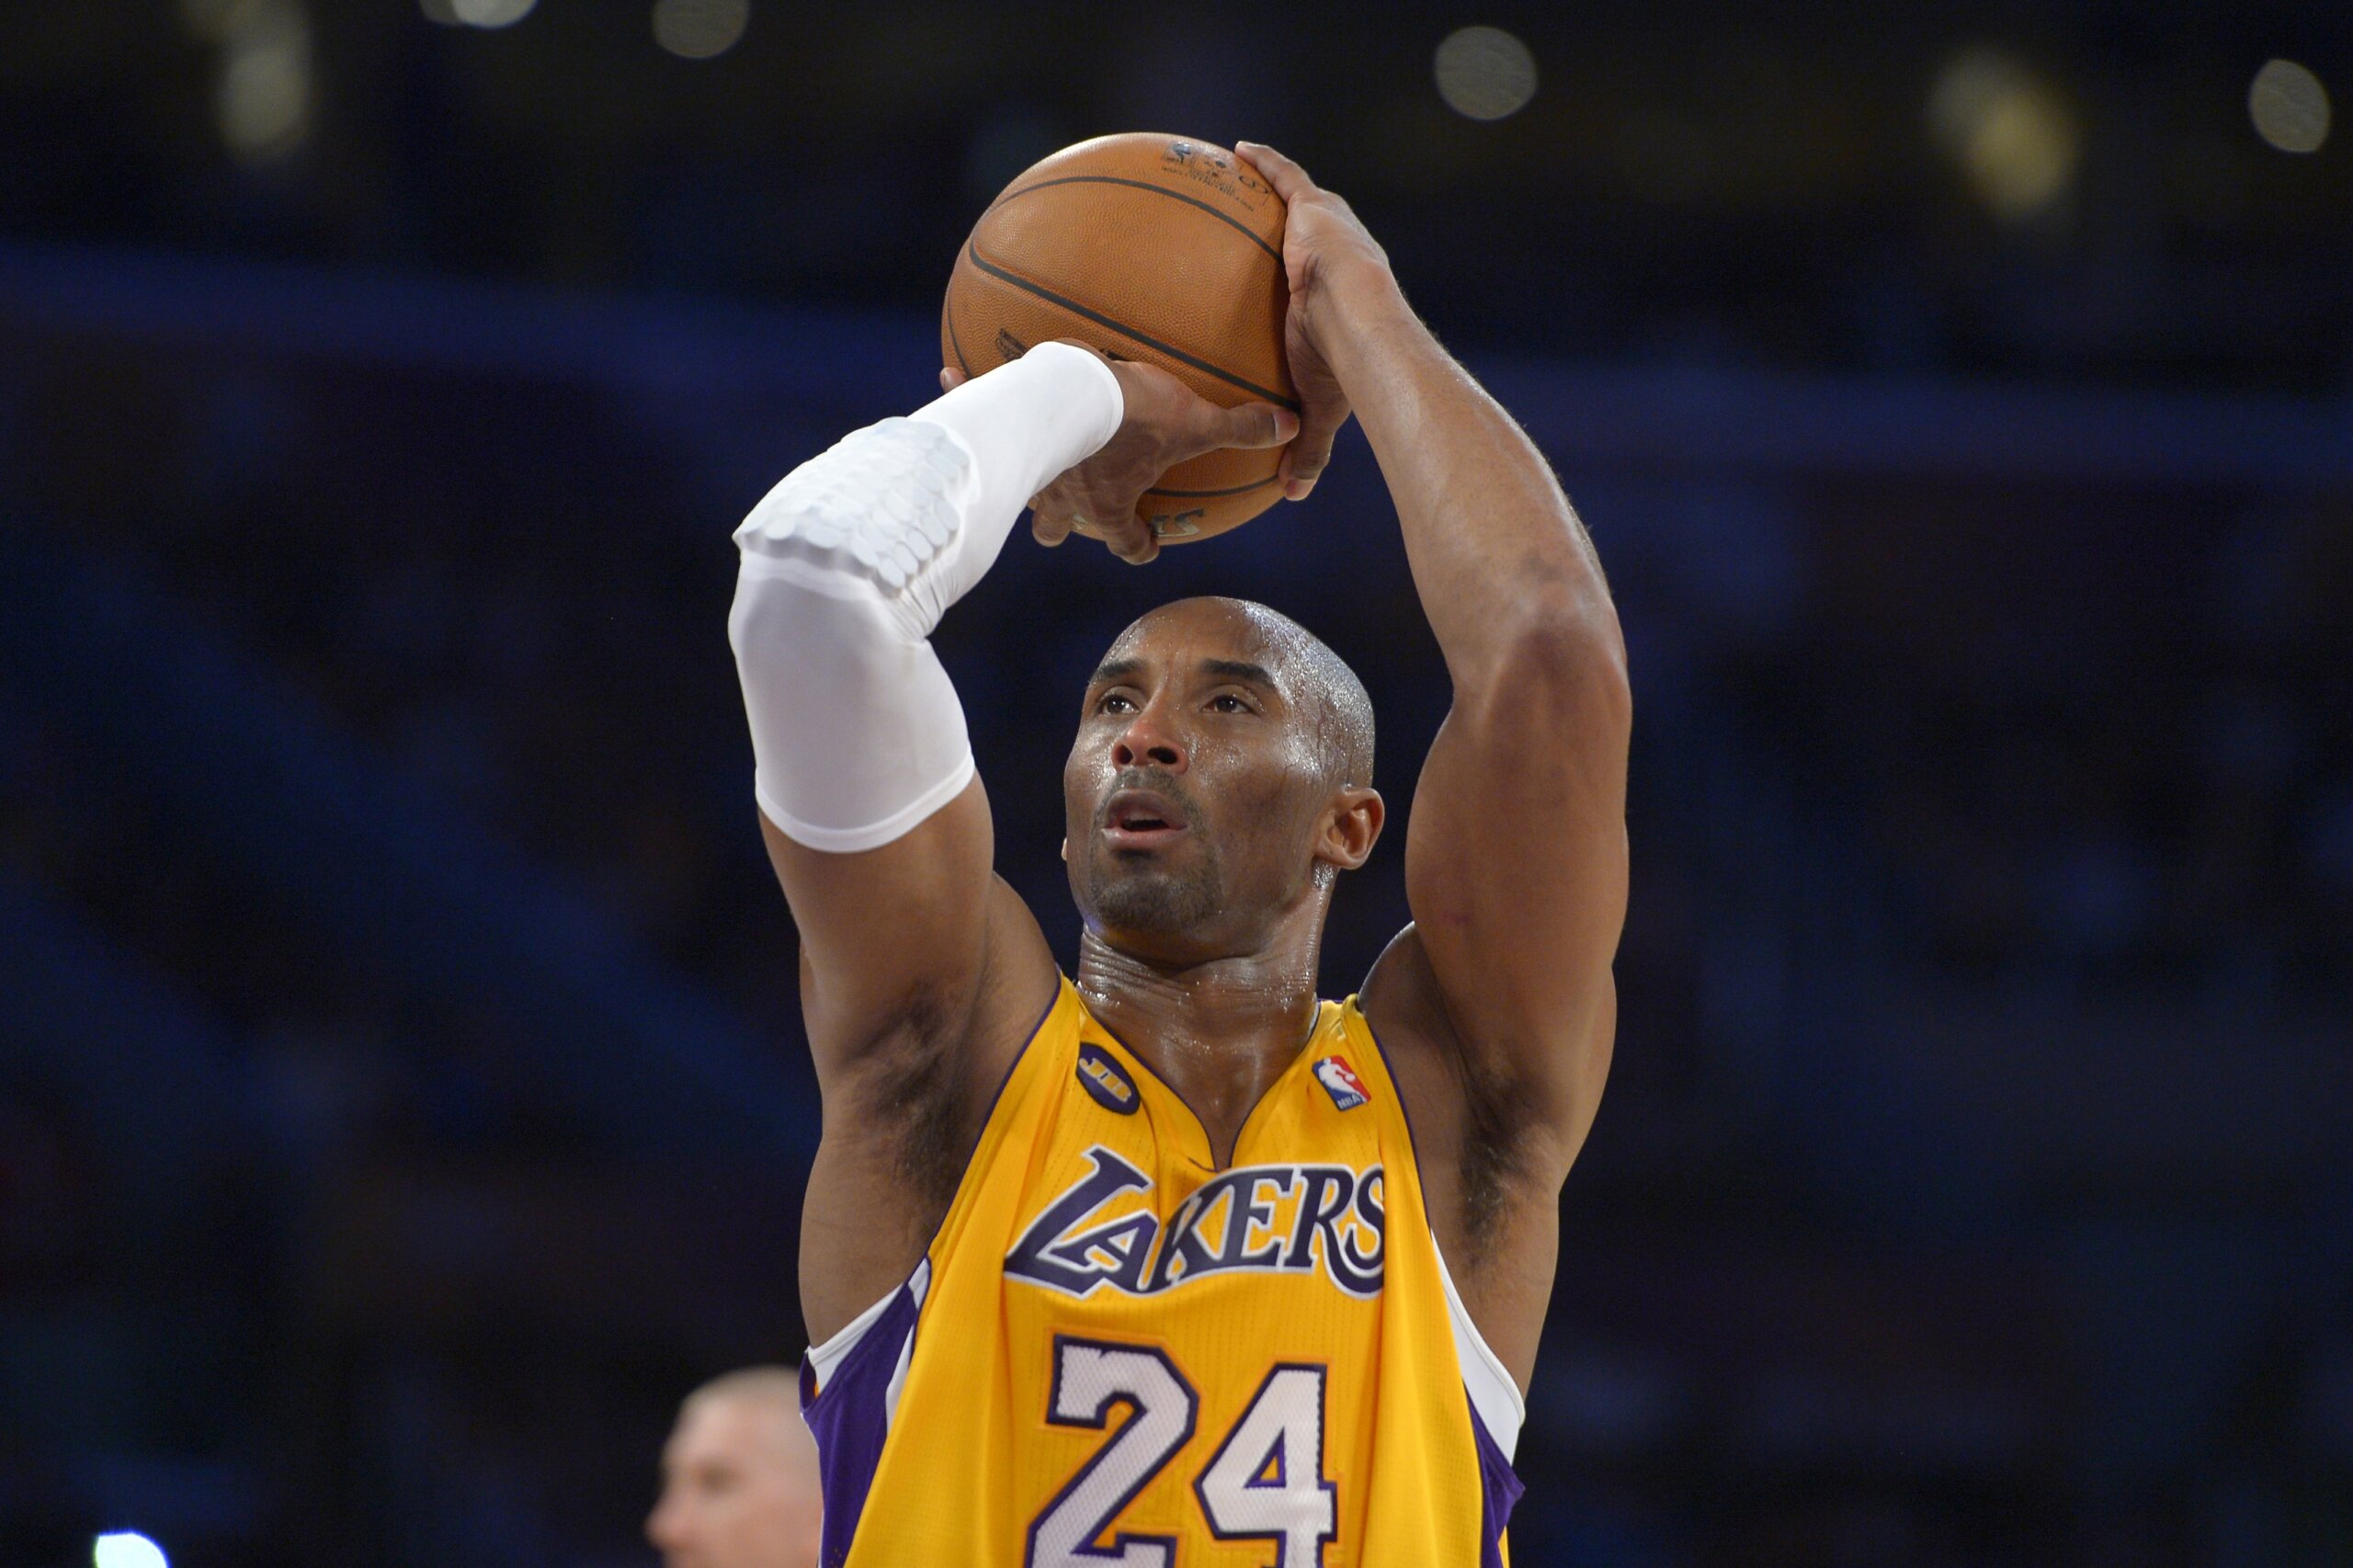 The Rise brings out new Kobe Bryant details from his youth